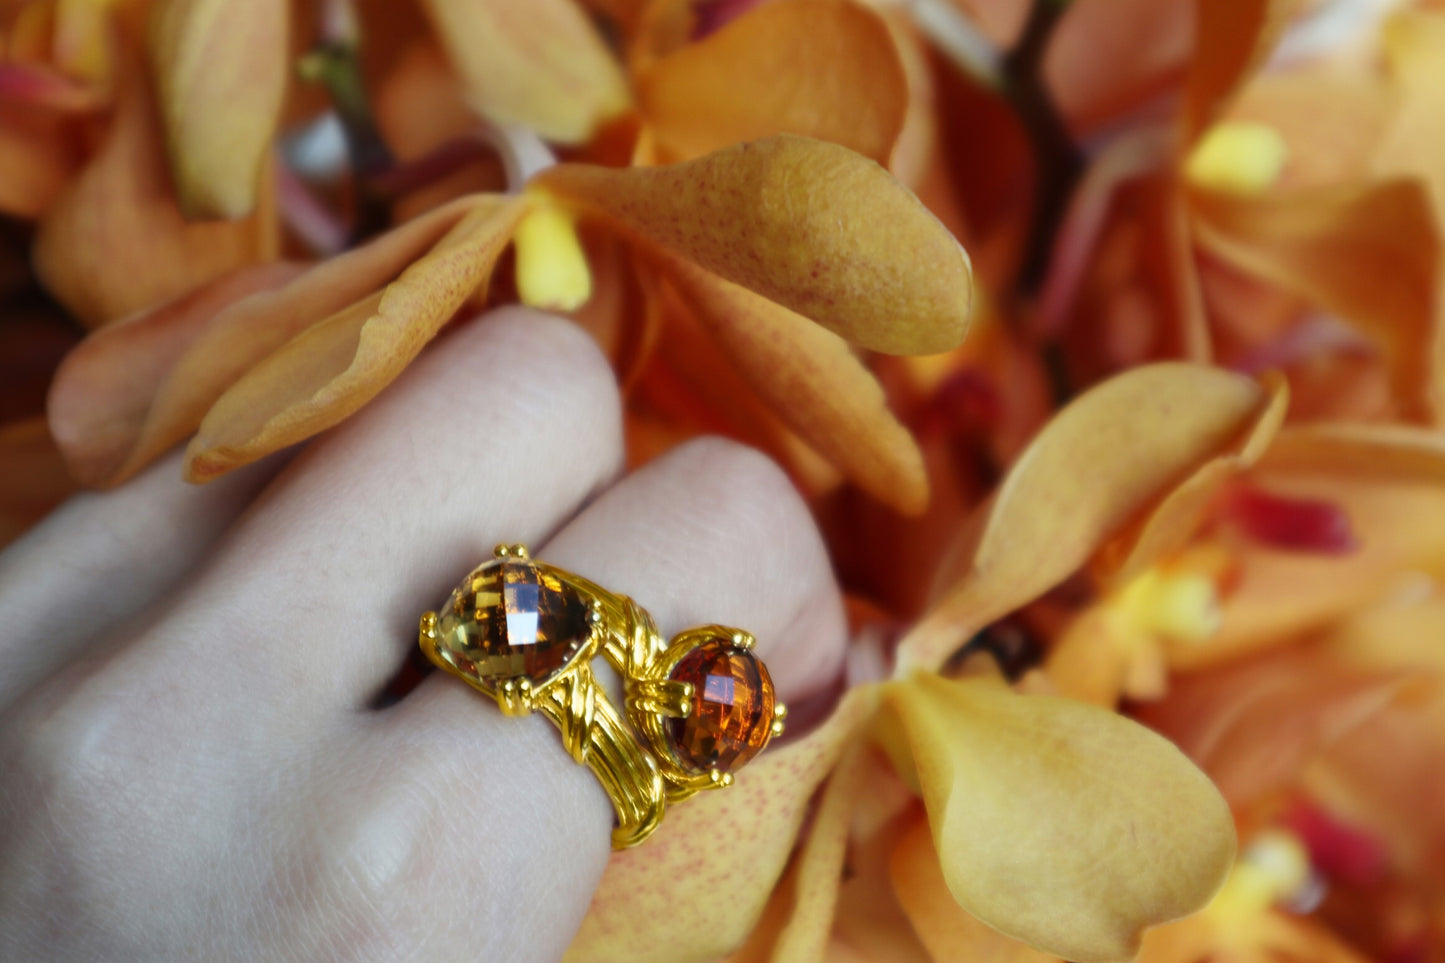 Fantasies Medeira Citrine Cocktail Ring in 18K yellow gold 10mm